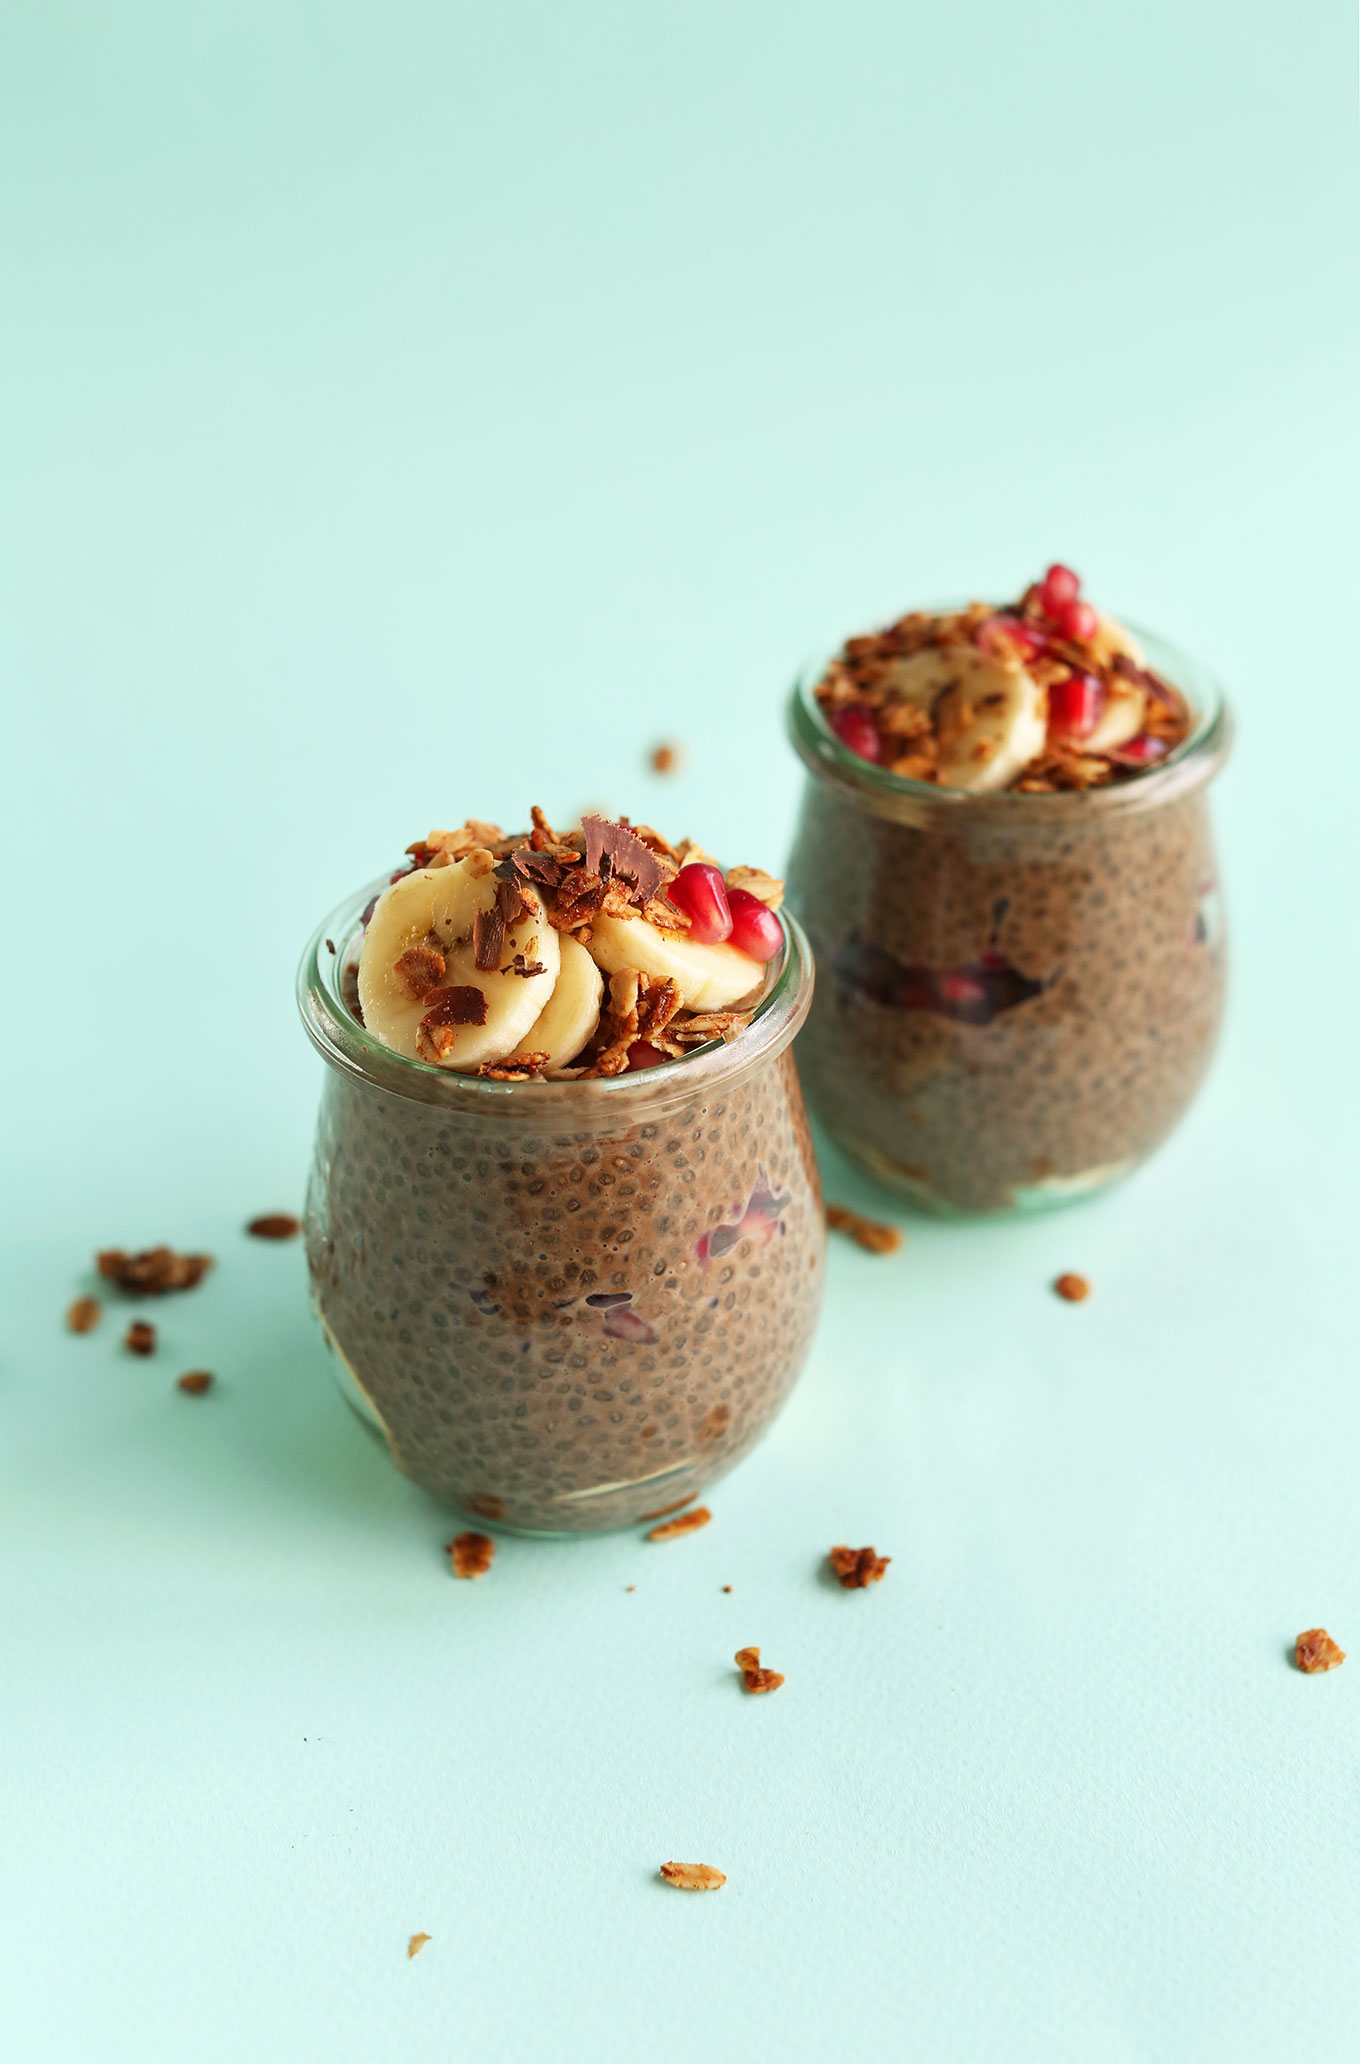 Jars of Chocolate Chia Seed Pudding topped with sliced bananas, cacao nibs, and pomegranate seeds